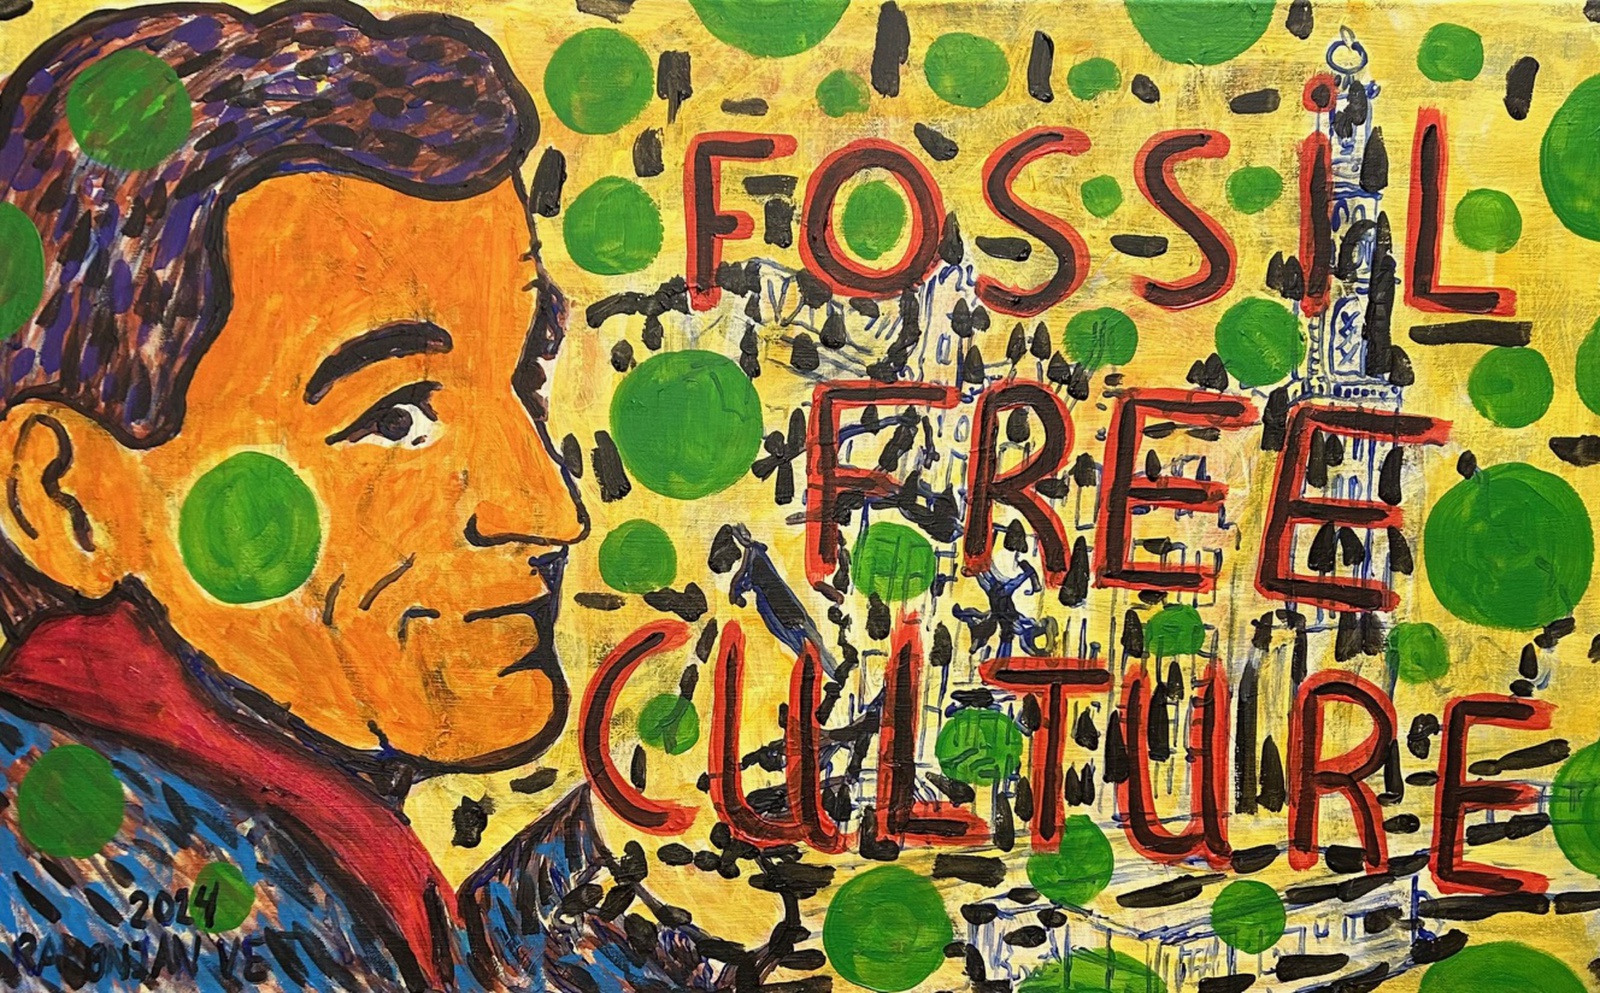 Fossil Free Culture